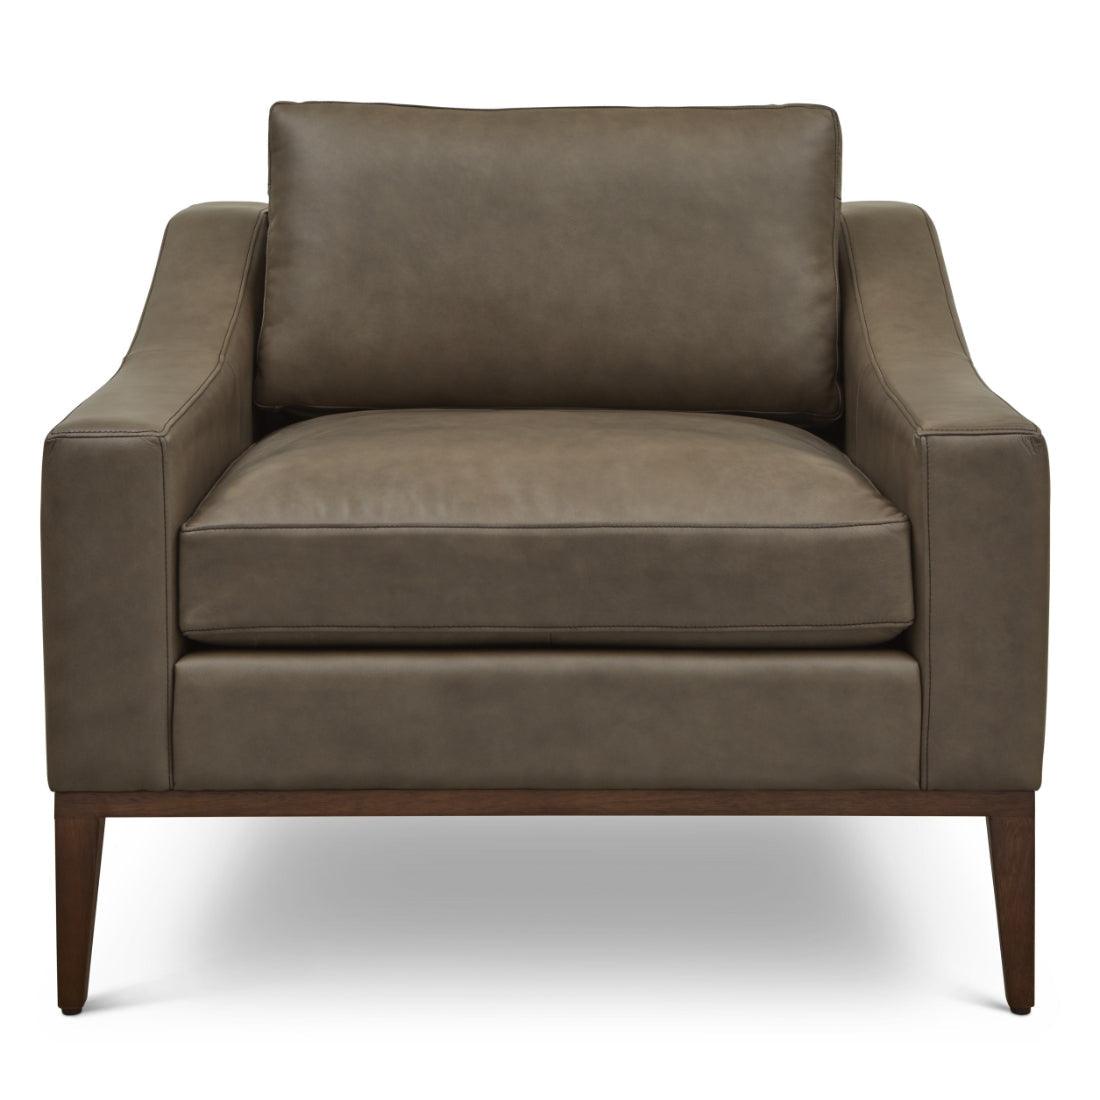 Large Leather Club Chair for Living Room - Uptown Sebastian